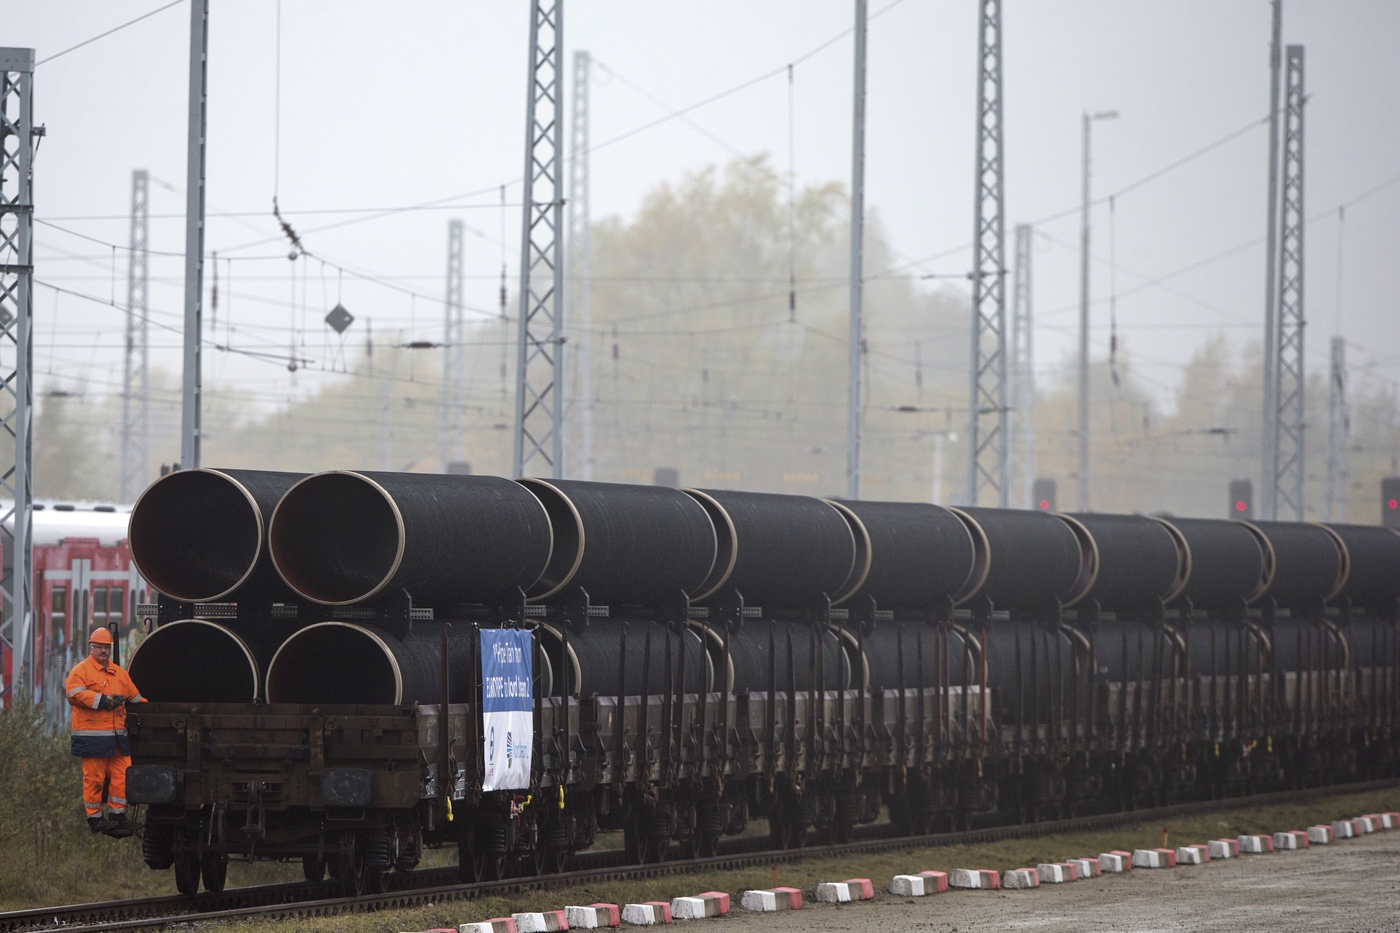 The first pipes for the Nord Stream 2 pipeline were delivered by rail on 27 October 2016 to Mukran on the island of Rügen in Germany (photo Nord Stream 2)